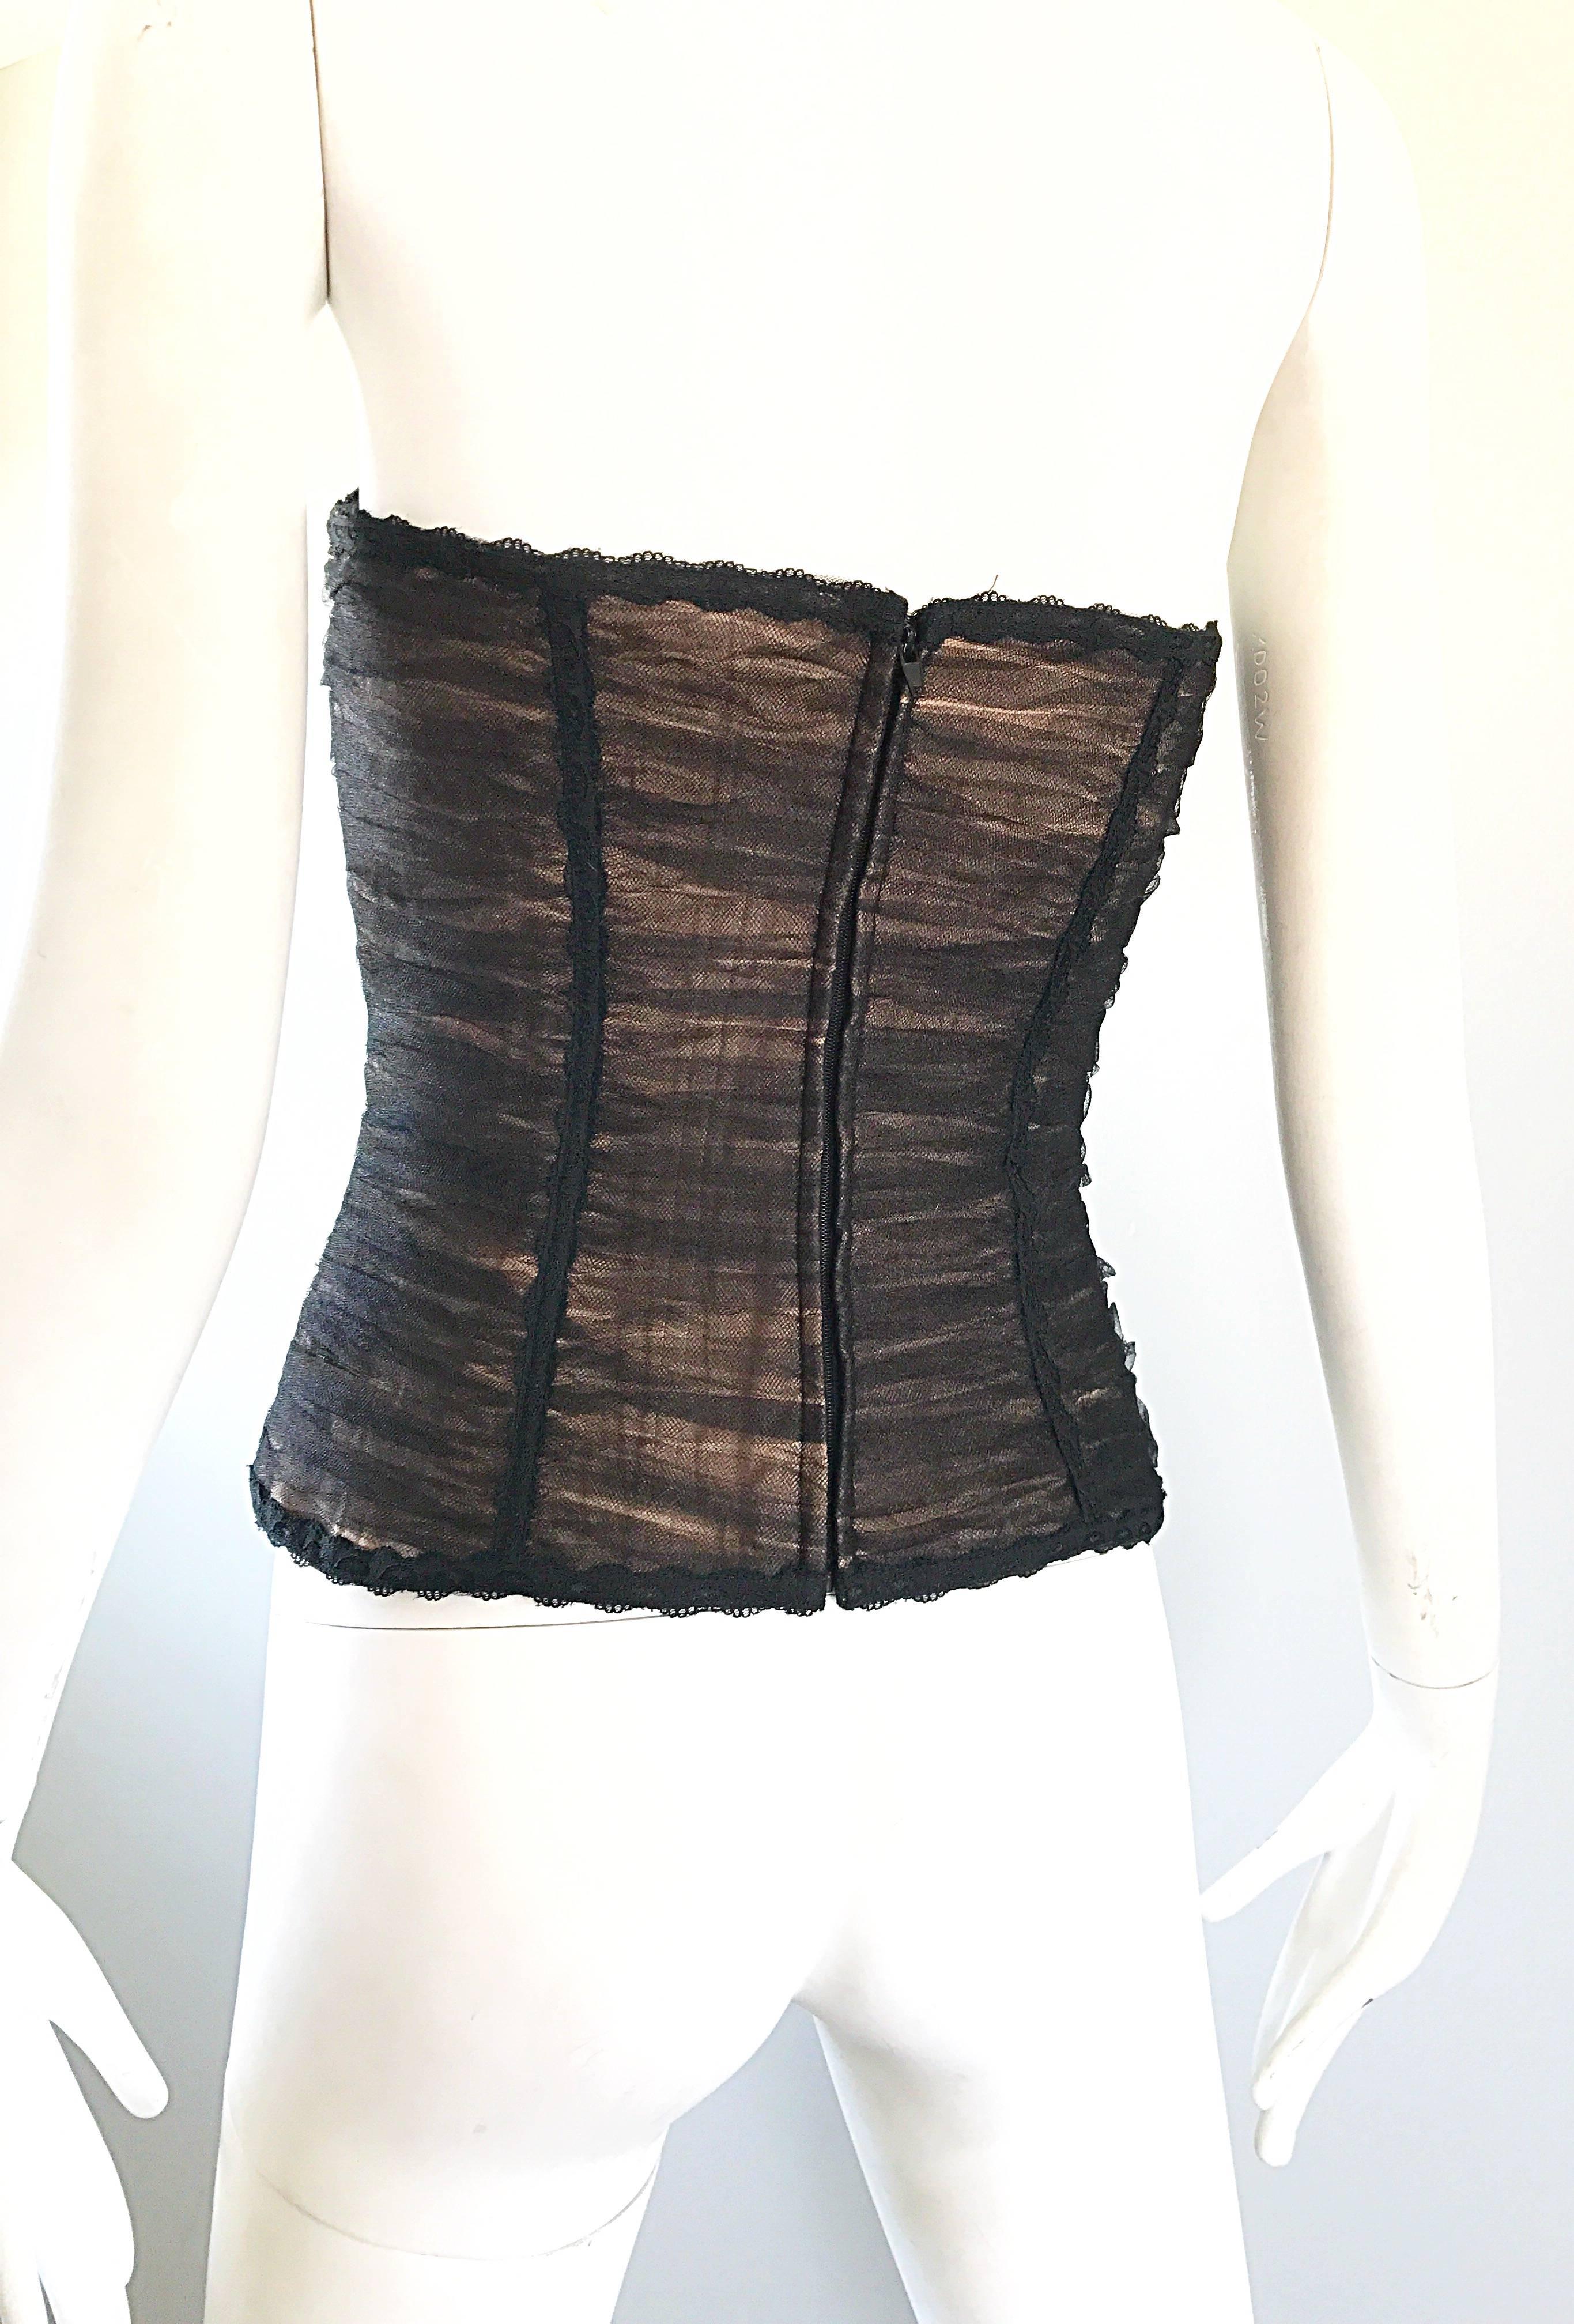 Rene Ruiz Couture Black and Nude Strapless Silk Net Overlay Bustier Corset Top For Sale 1